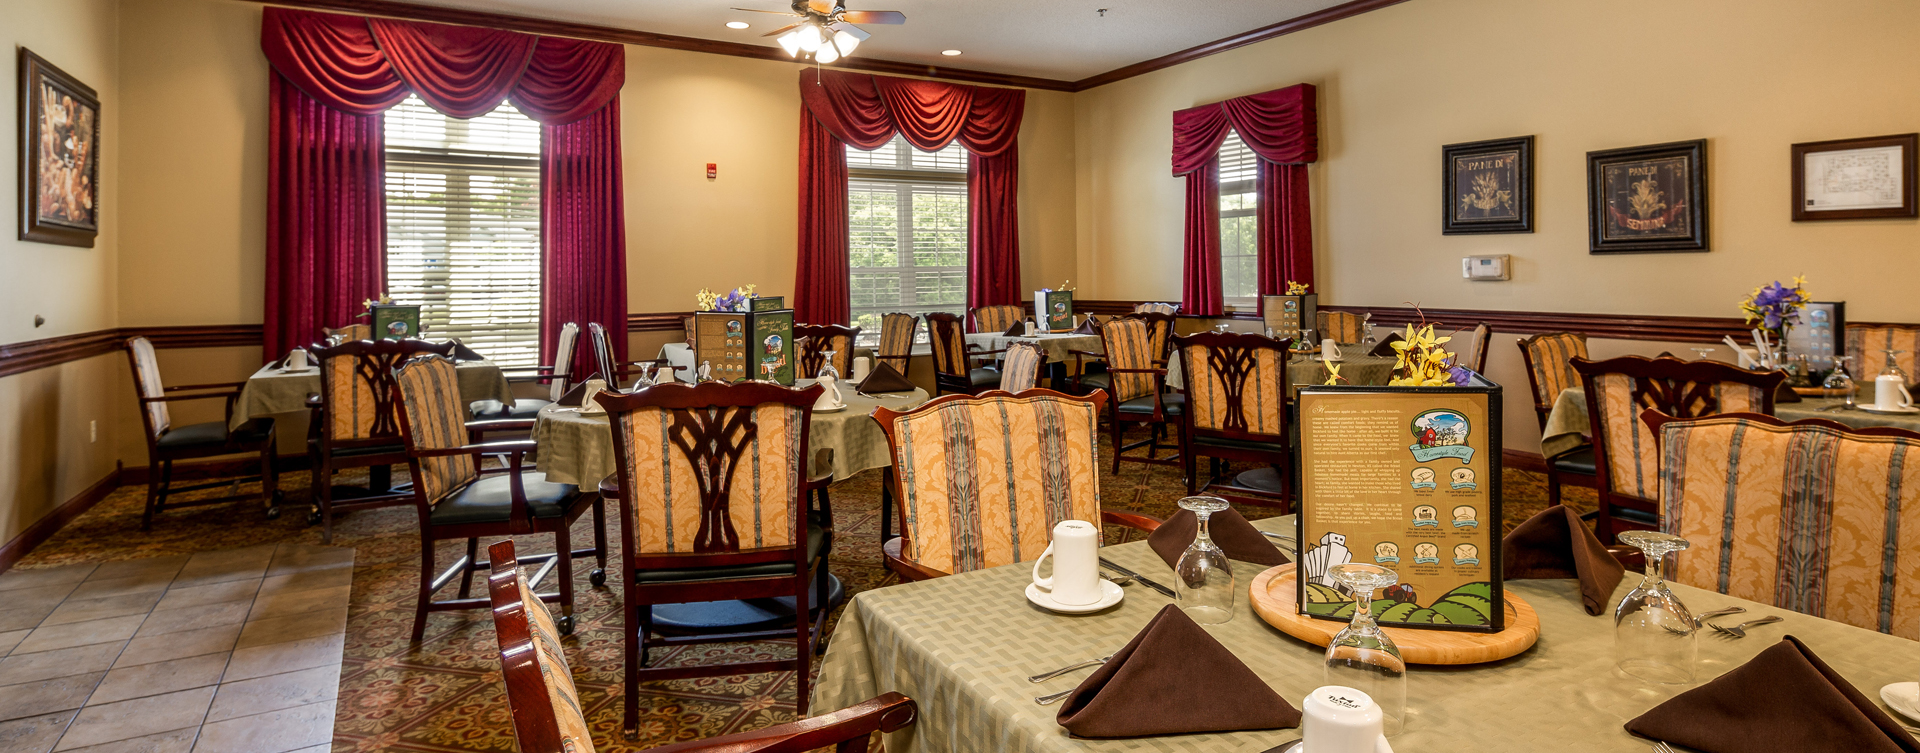 Enjoy restaurant -style meals served three times a day in our dining room at Bickford of Battle Creek